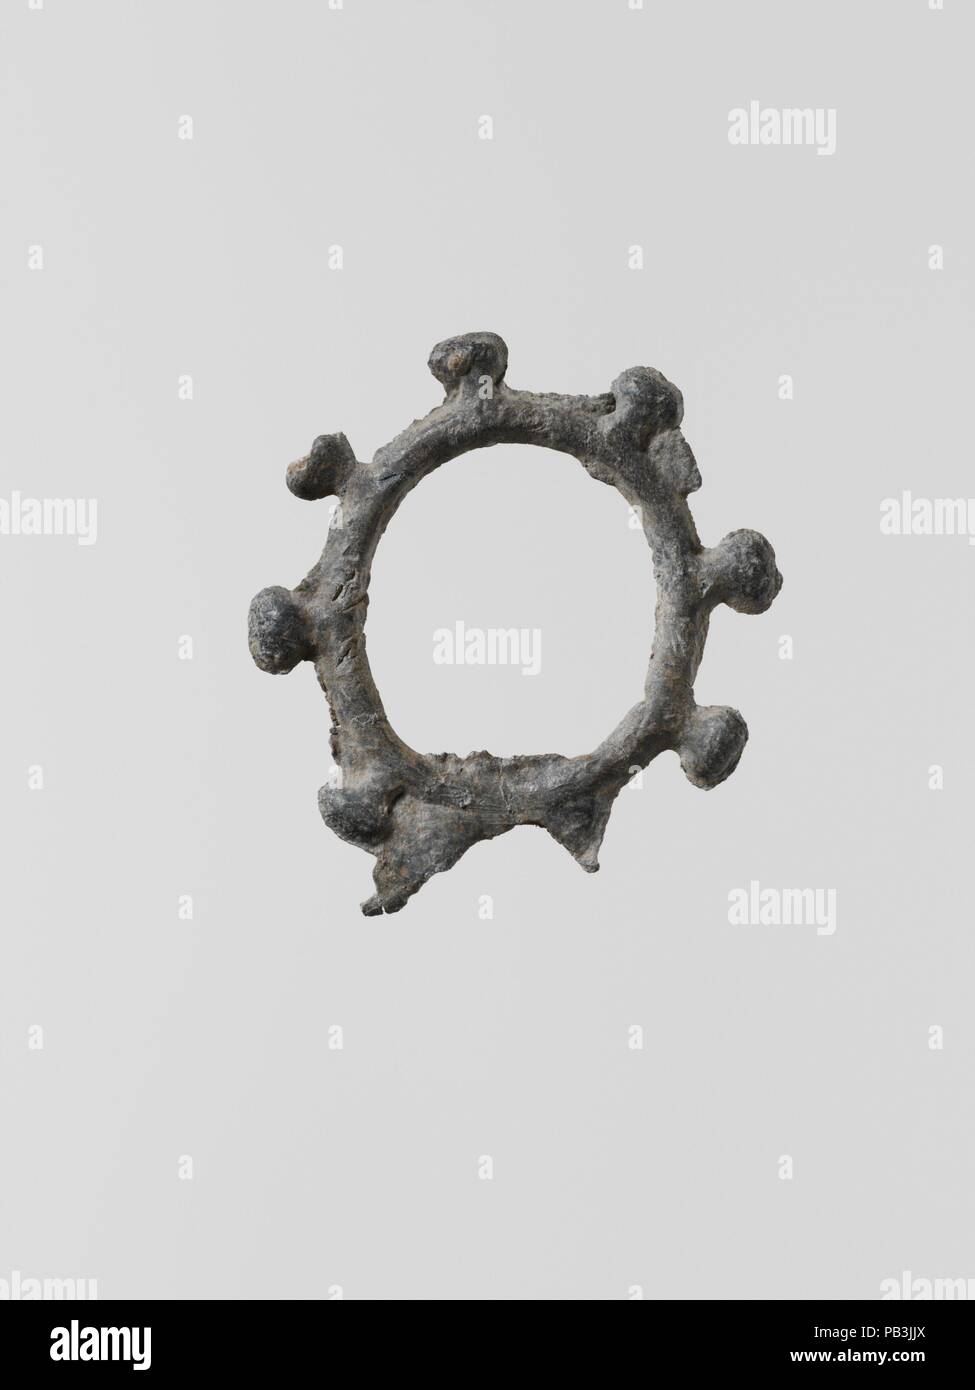 Lead wreath. Culture: Greek, Laconian. Dimensions: Diameter: 5/8 in. (1.7 cm). Date: 6th-5th century B.C..  Small flat votive figurines of cast lead have been found in great quantities at the ancient sanctuaries of Laconia; over one hundred thousand, dating from the seventh century B.C. to the Classical period, were dedicated to the goddess Artemis Orthia in Sparta. Museum: Metropolitan Museum of Art, New York, USA. Stock Photo